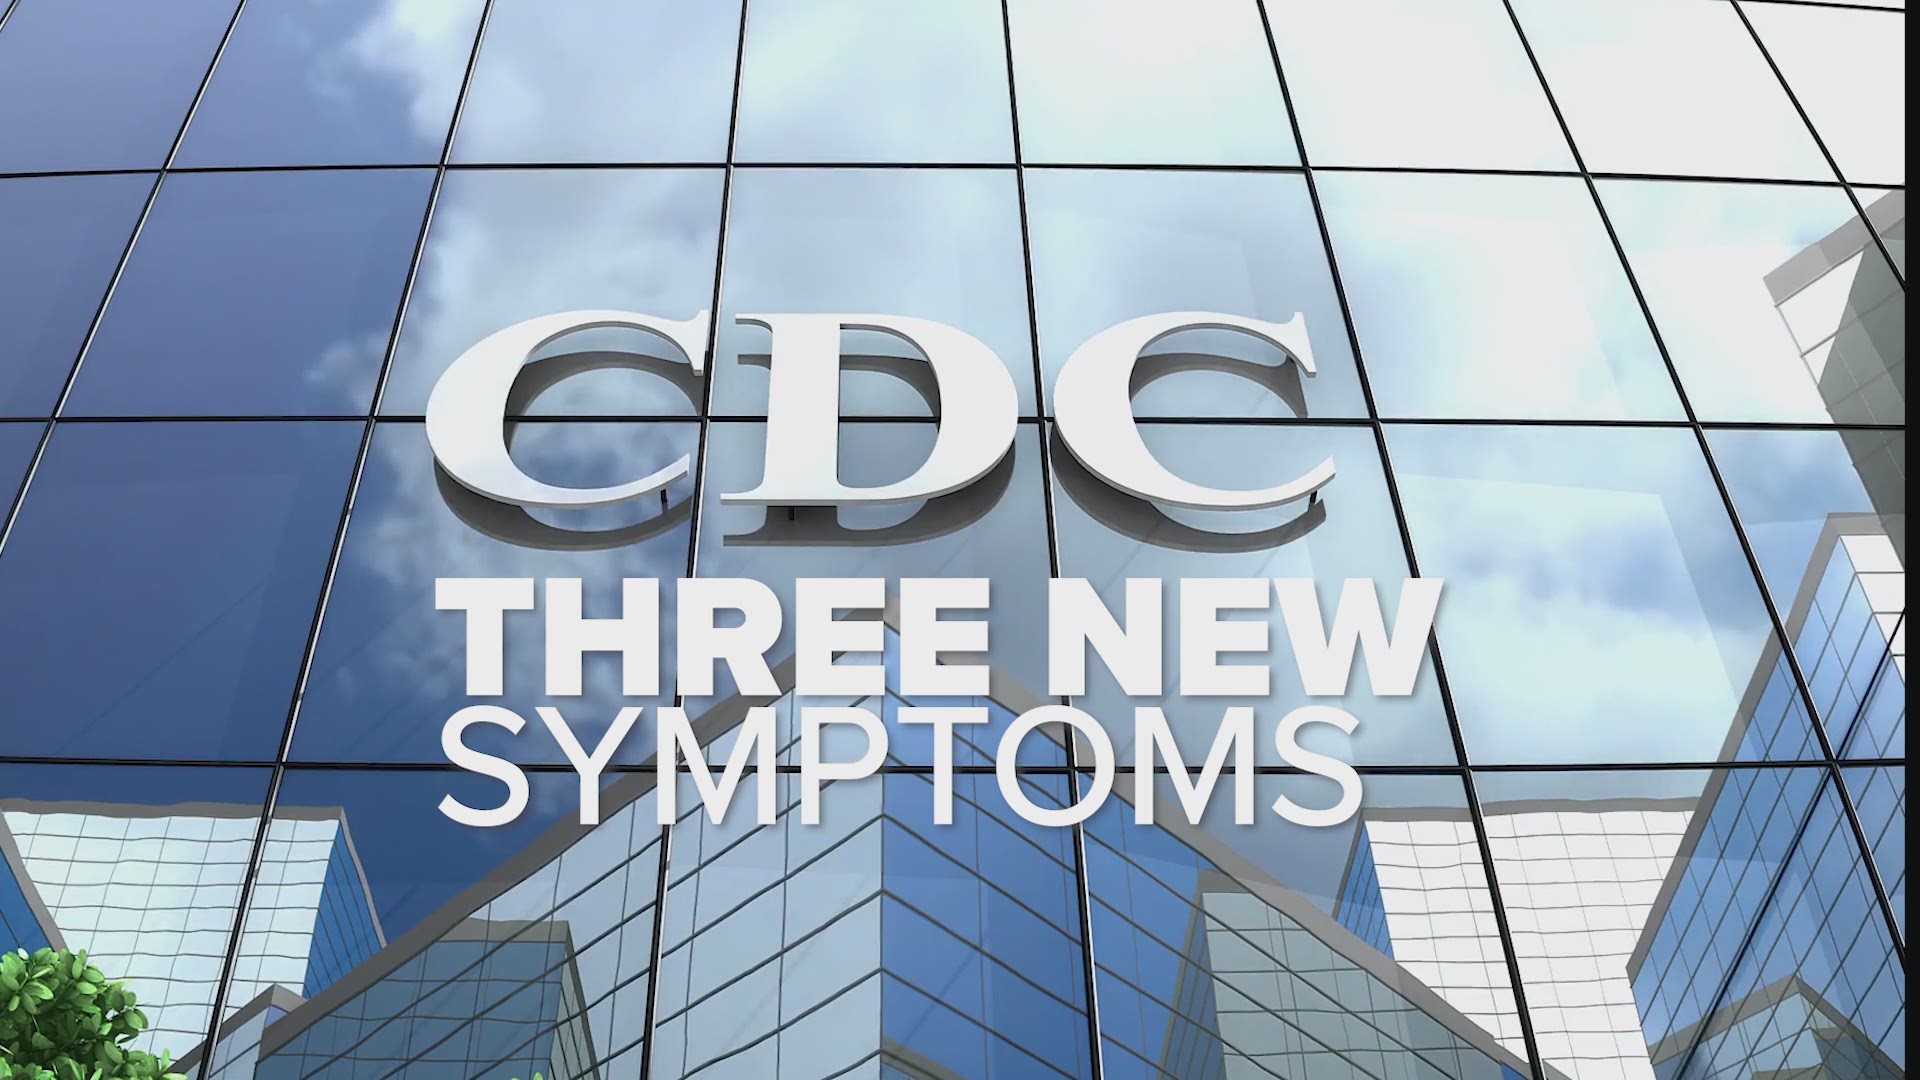 The CDC added new COVID-19 symptoms. Here's what to look out for.